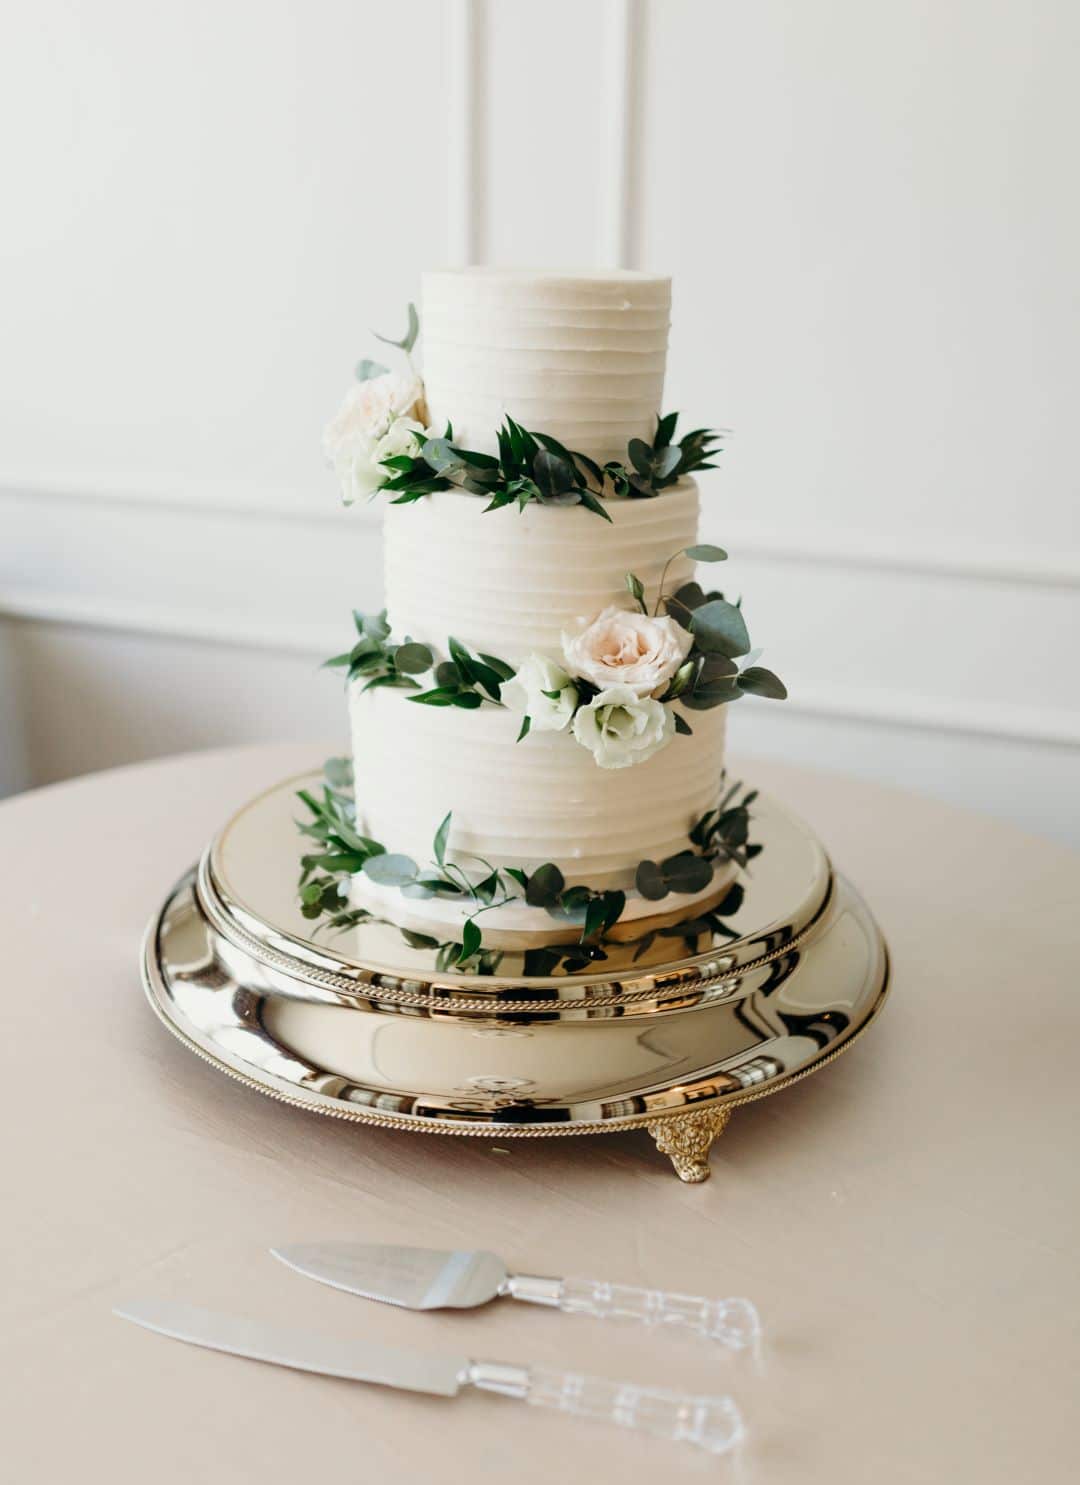 Beautiful simple wedding cake with eucalyptus and roses for earthy summer garden wedding in September, neutrals & greenery